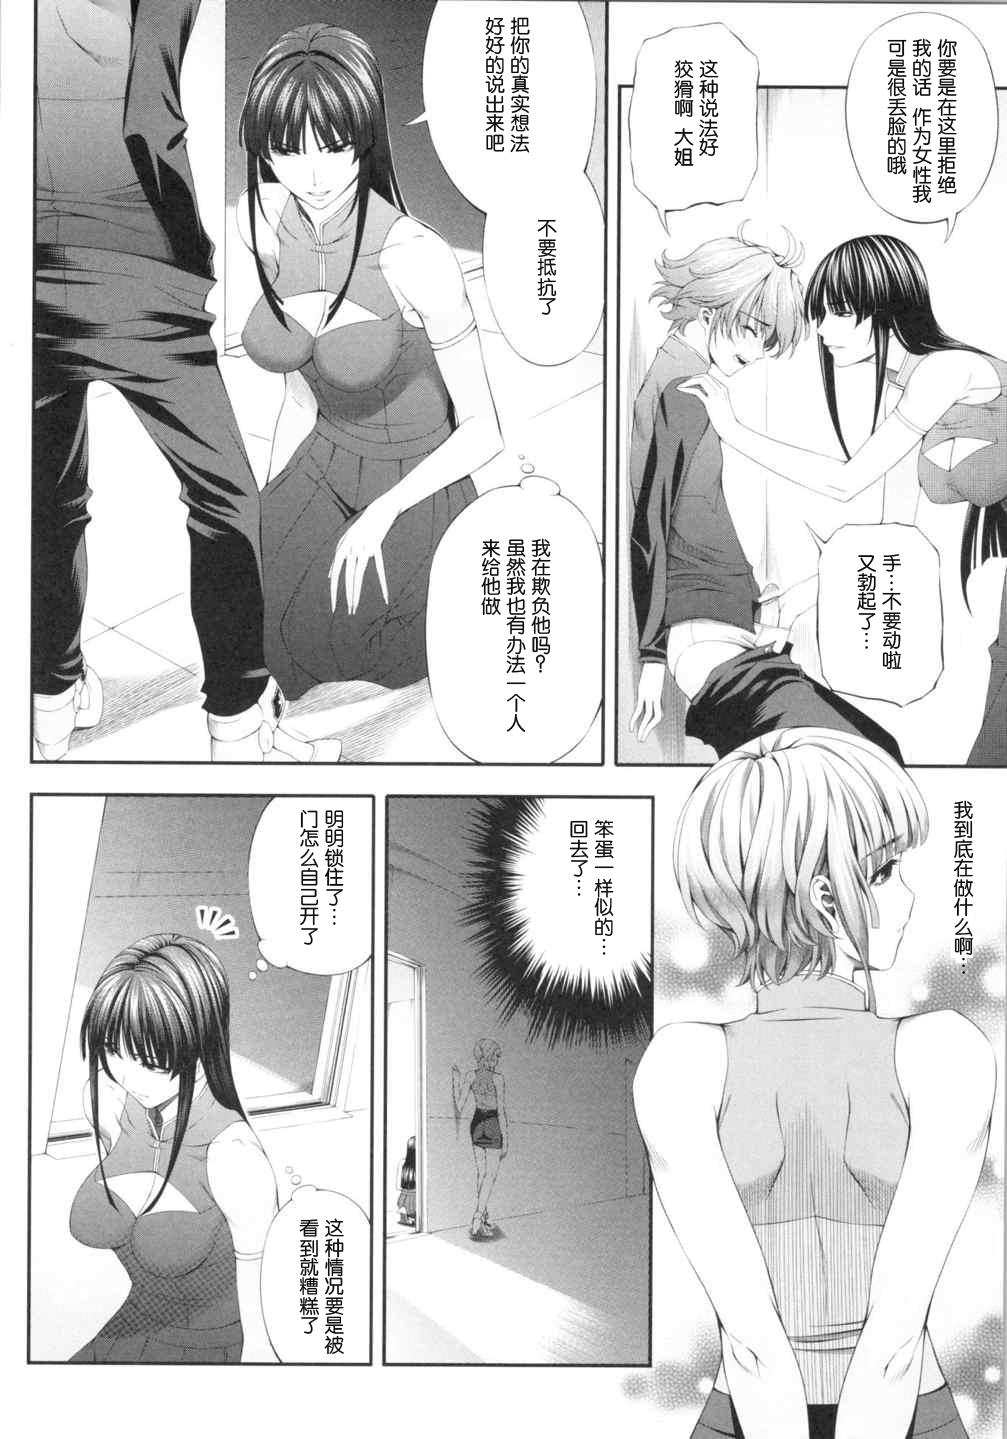 Double Blowjob Ouka of book - Super robot wars Gay Brownhair - Page 5